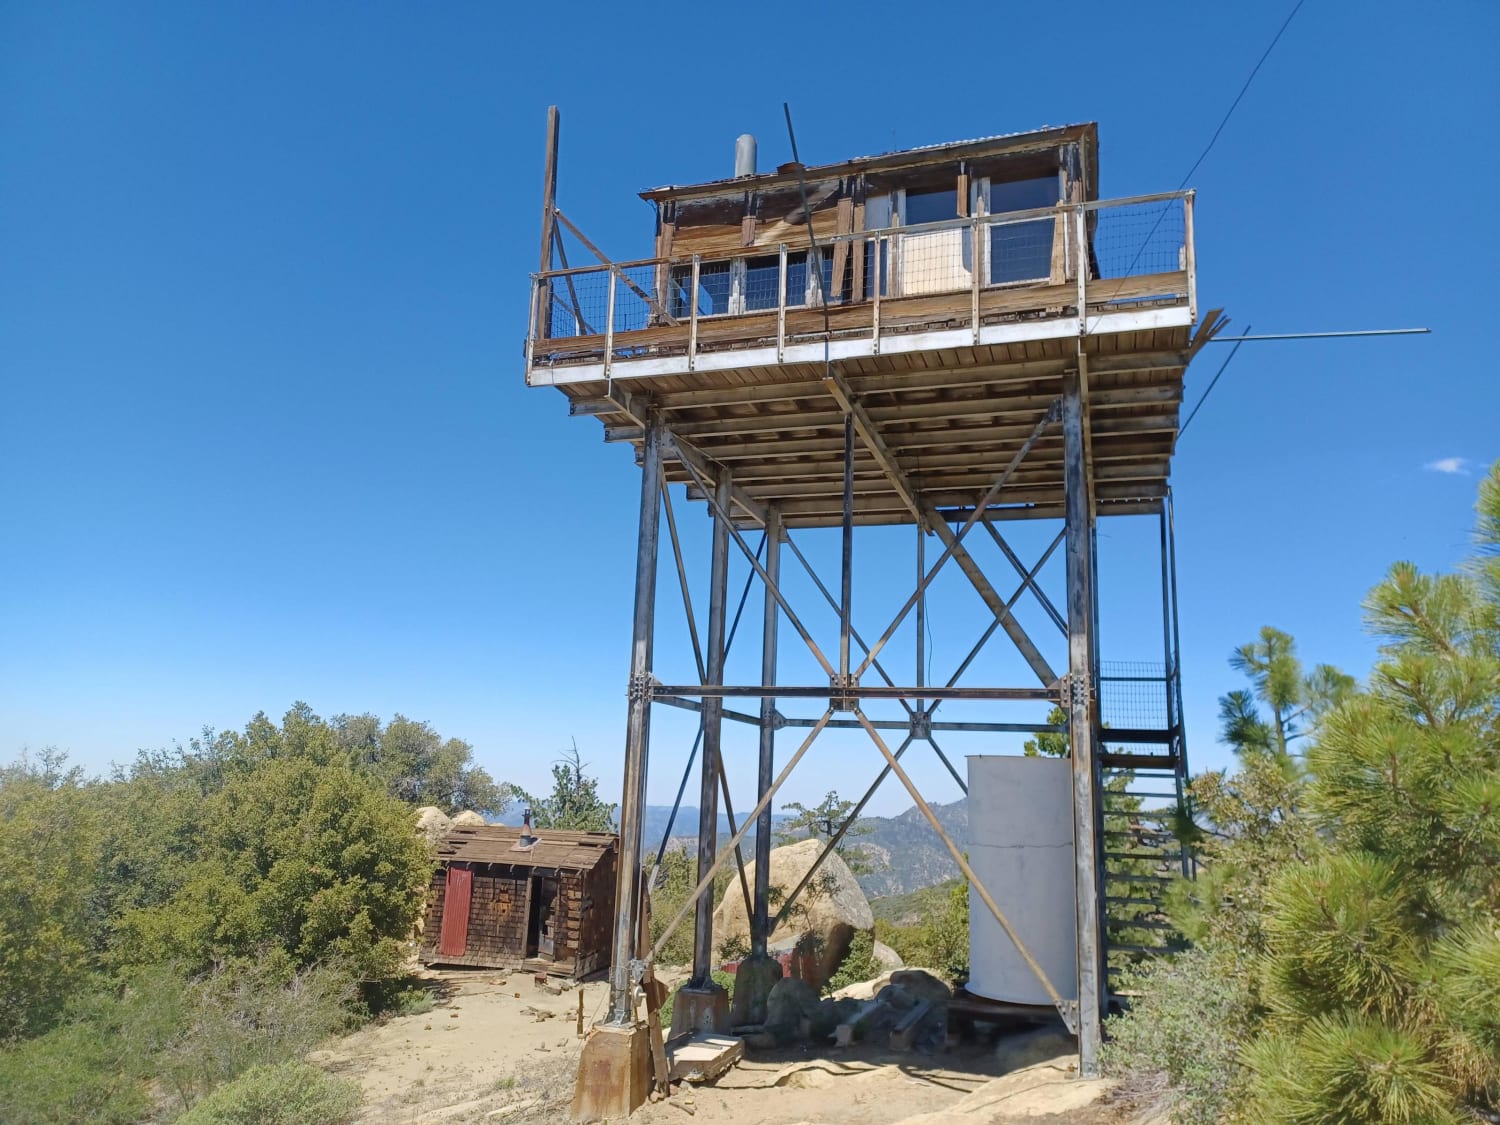 Thorn Point Fire Lookout Tower